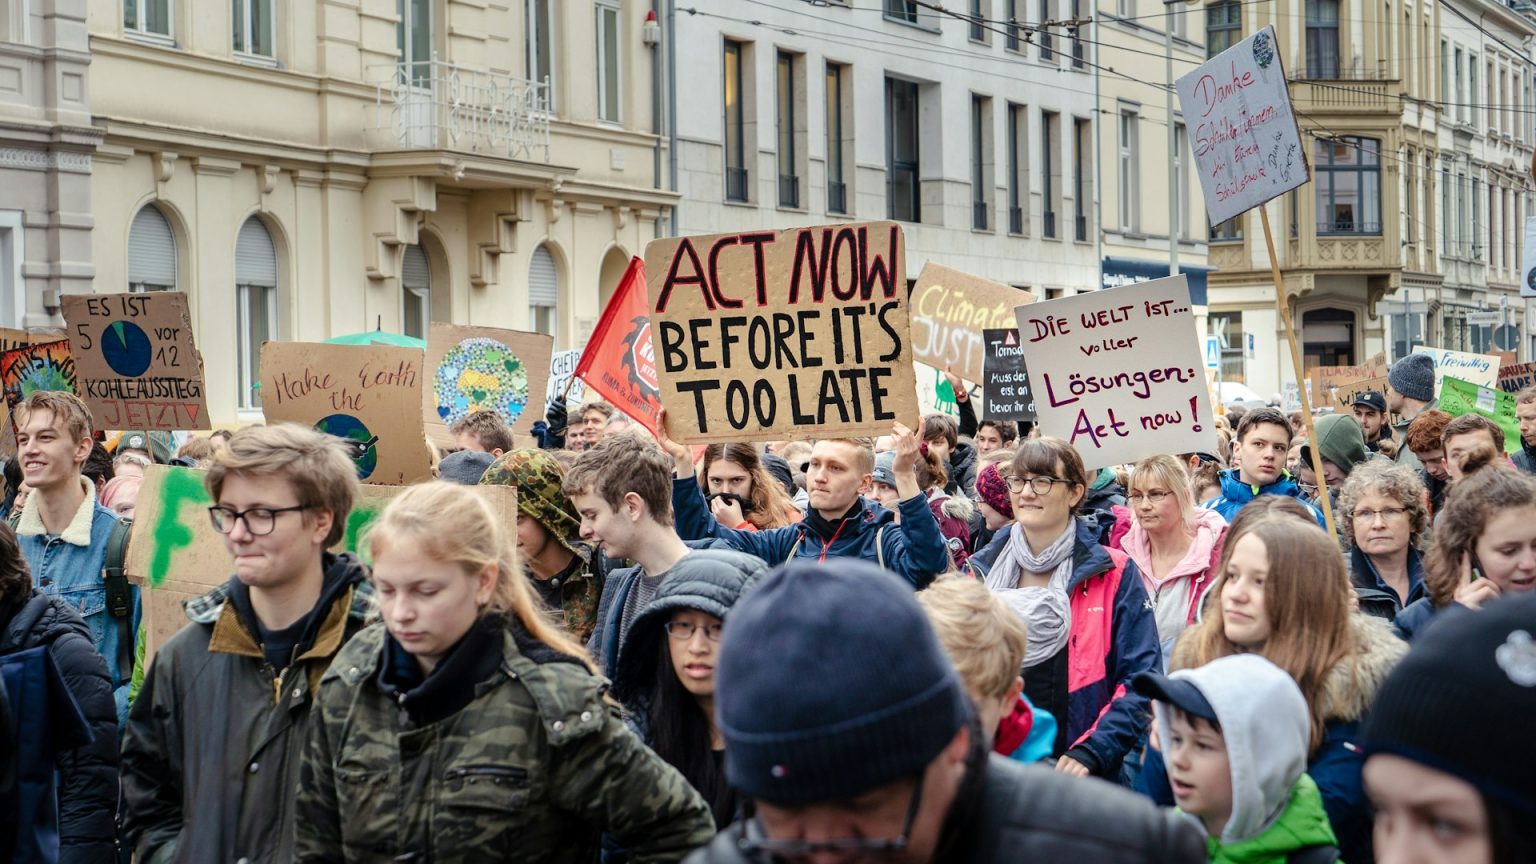 Crowd of diverse people at a climate protest holding signs with messages like "act now before it's too late".